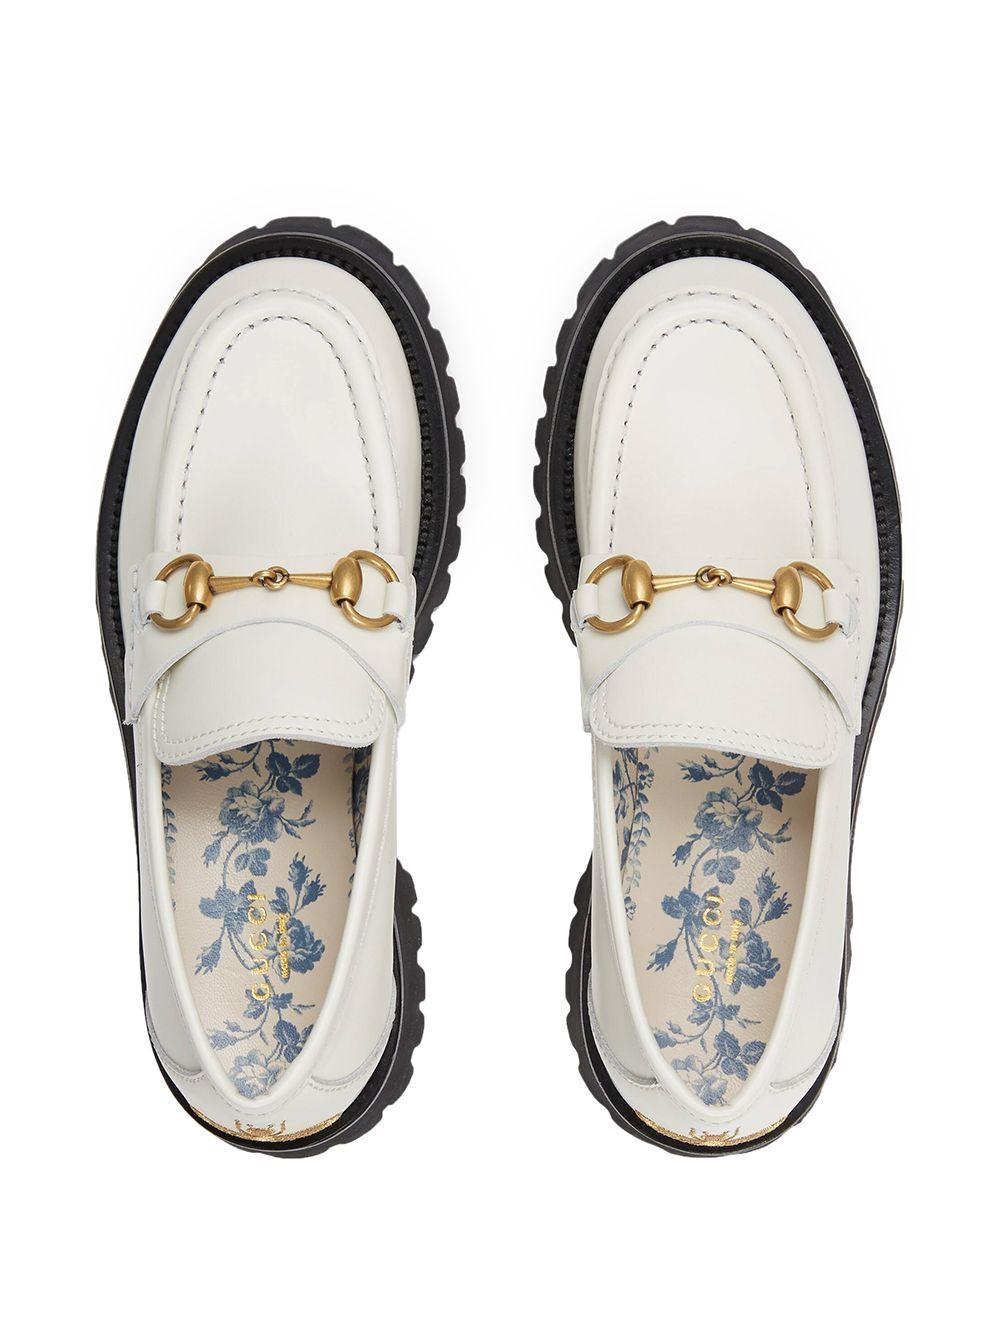 Gucci Lug Sole Horsebit Loafer in White | Lyst